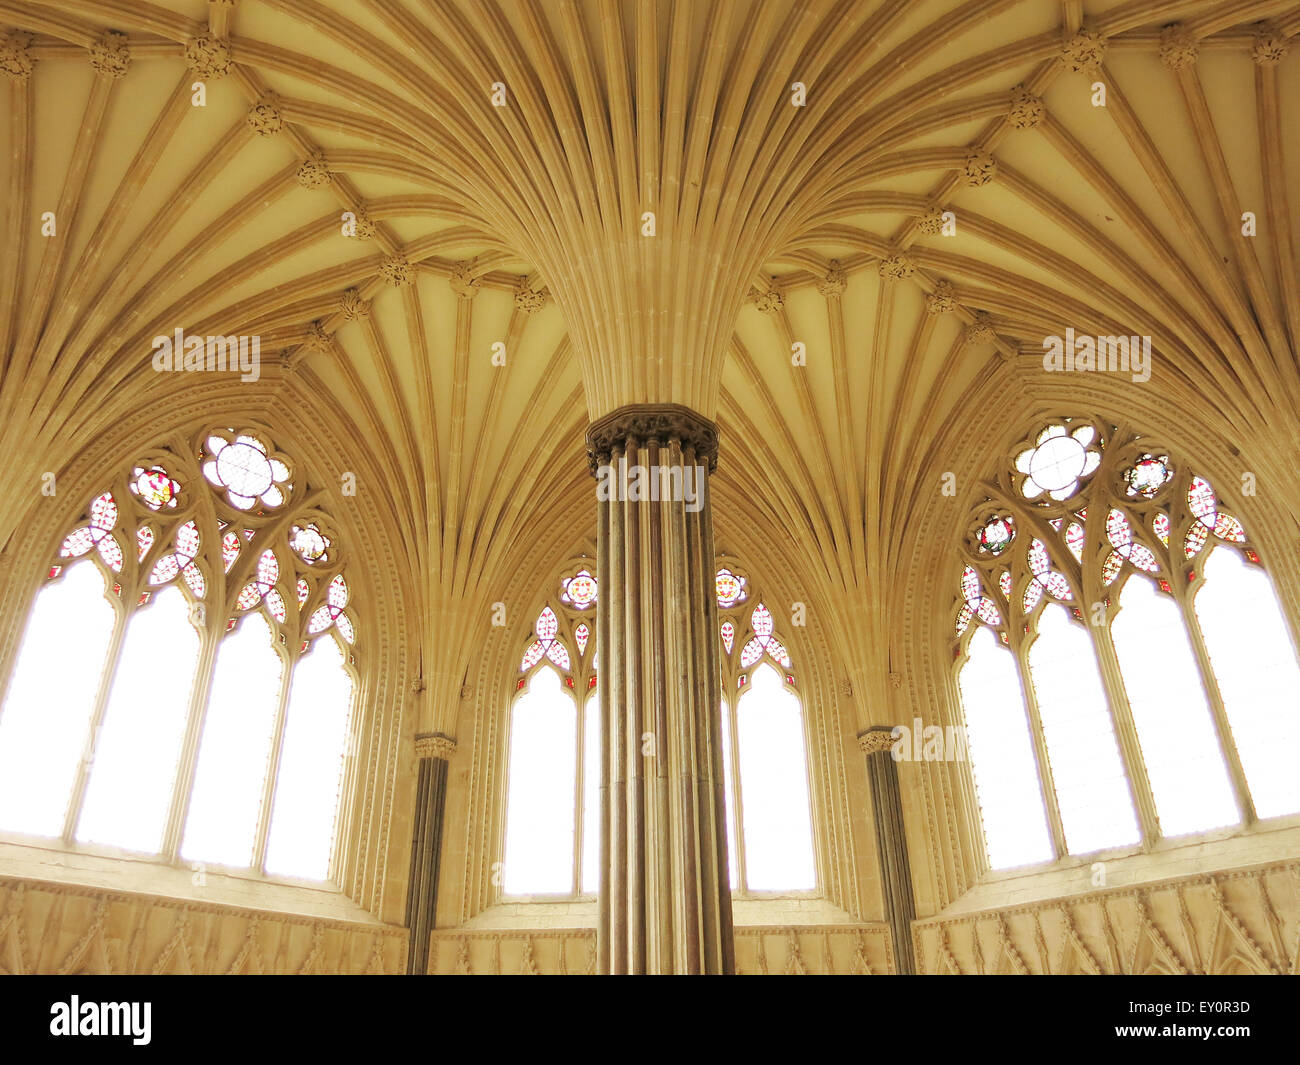 The decorative fan-vaulted ceiling of the Chapter House in Wells cathedral, Somerset, England, UK Stock Photo